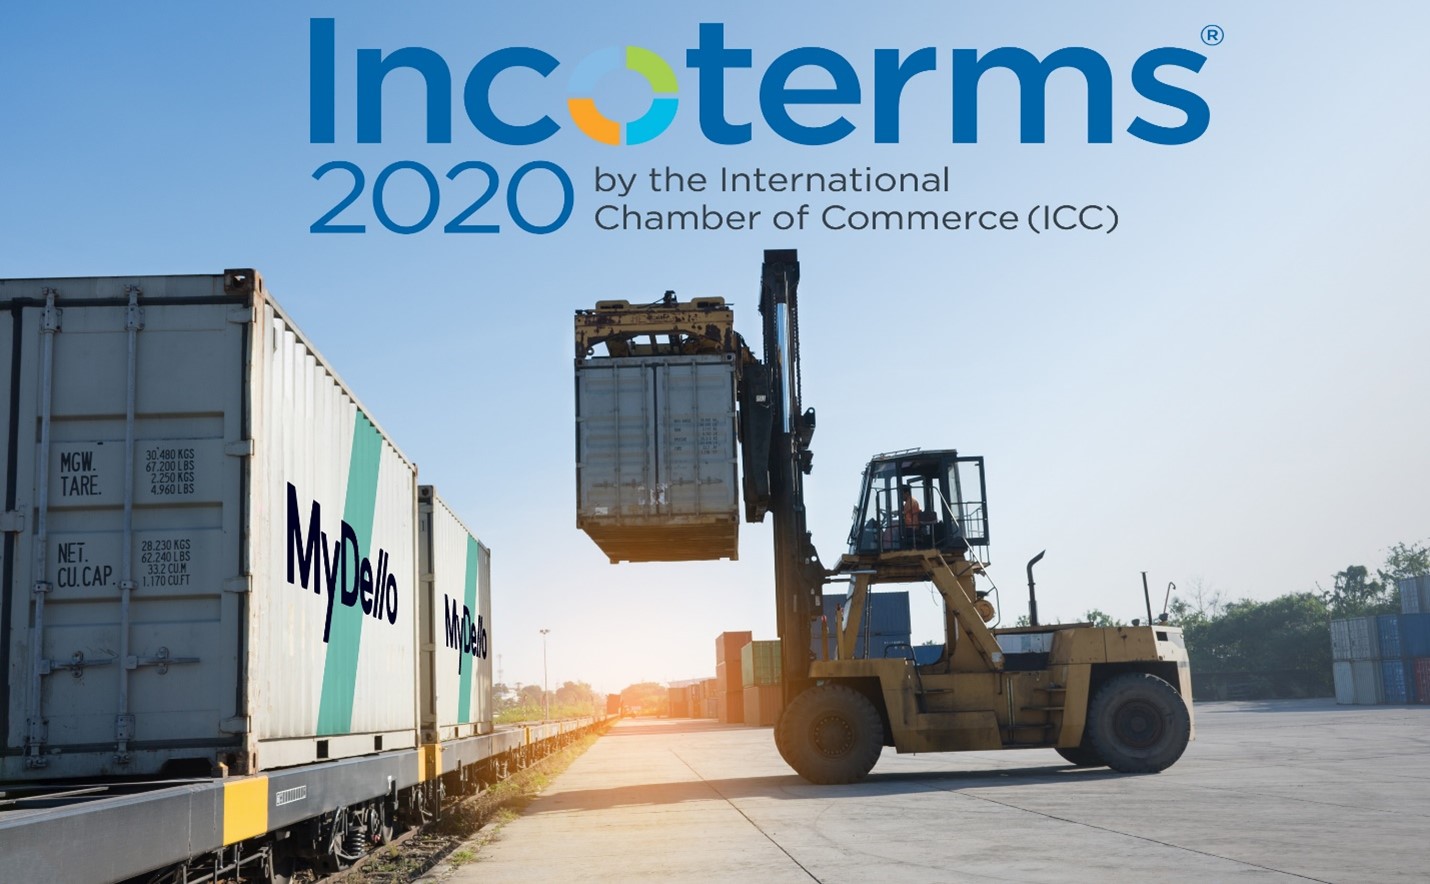 Loading container on train + Incoterms 2020 official logo